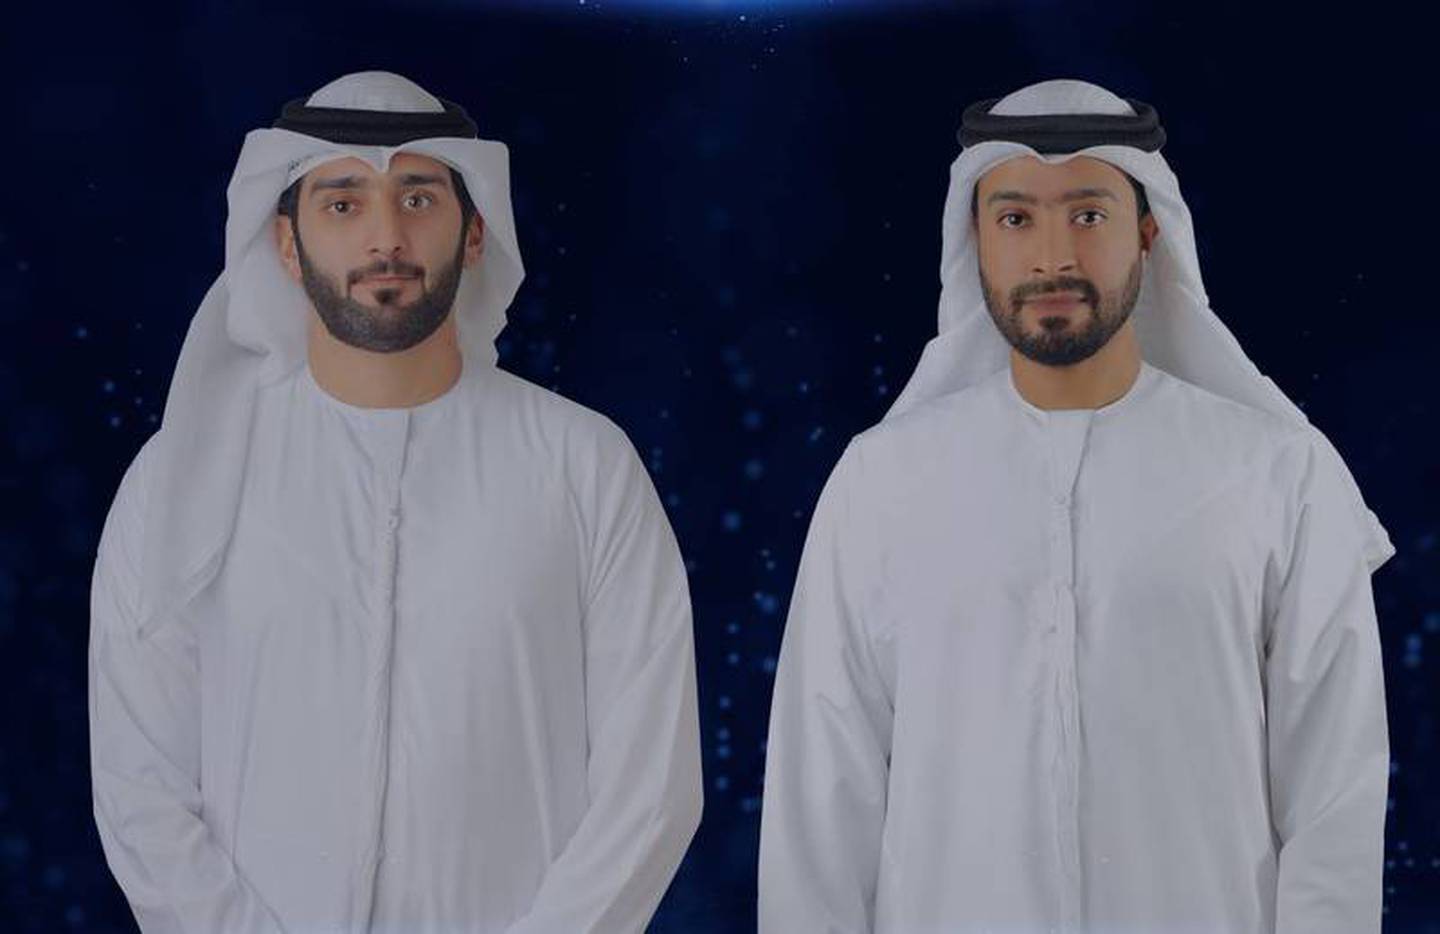 Abdullah Al Hammadi, left, and Saleh Al Ameri will take part in the experiment at a Russian research centre. Courtesy: Mohammed bin Rashid Space Centre